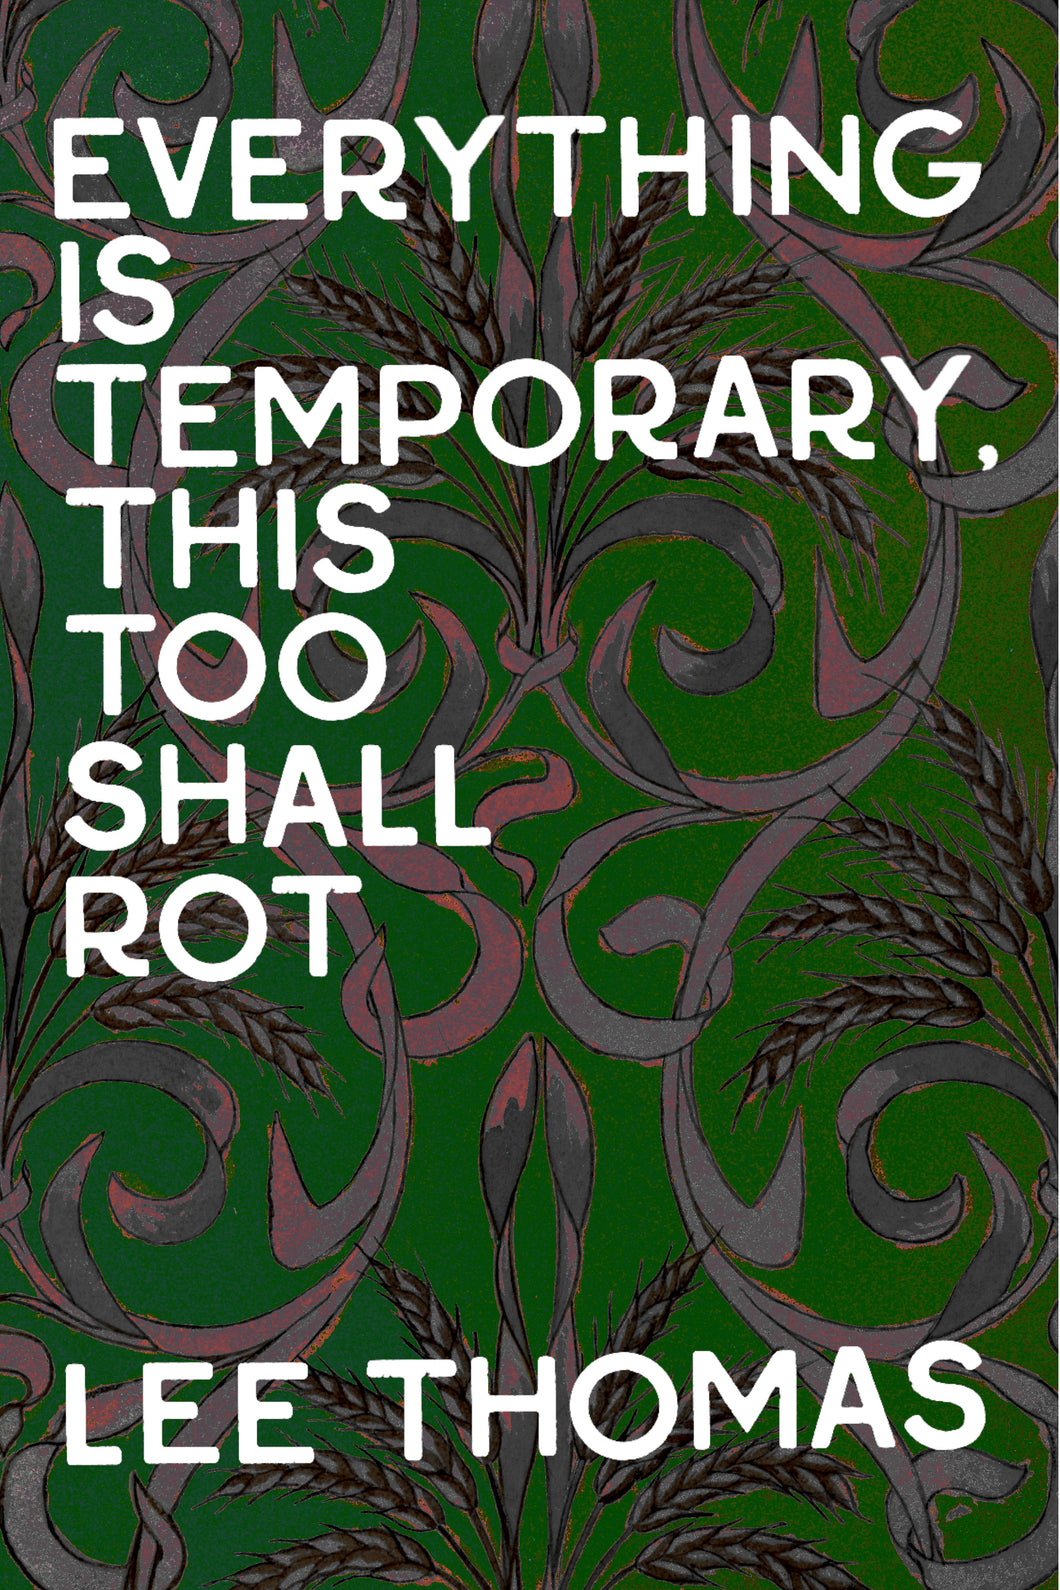 Everything is Temporary, This Too Shall Rot, by Lee Thomas-Print Books-Bottlecap Press